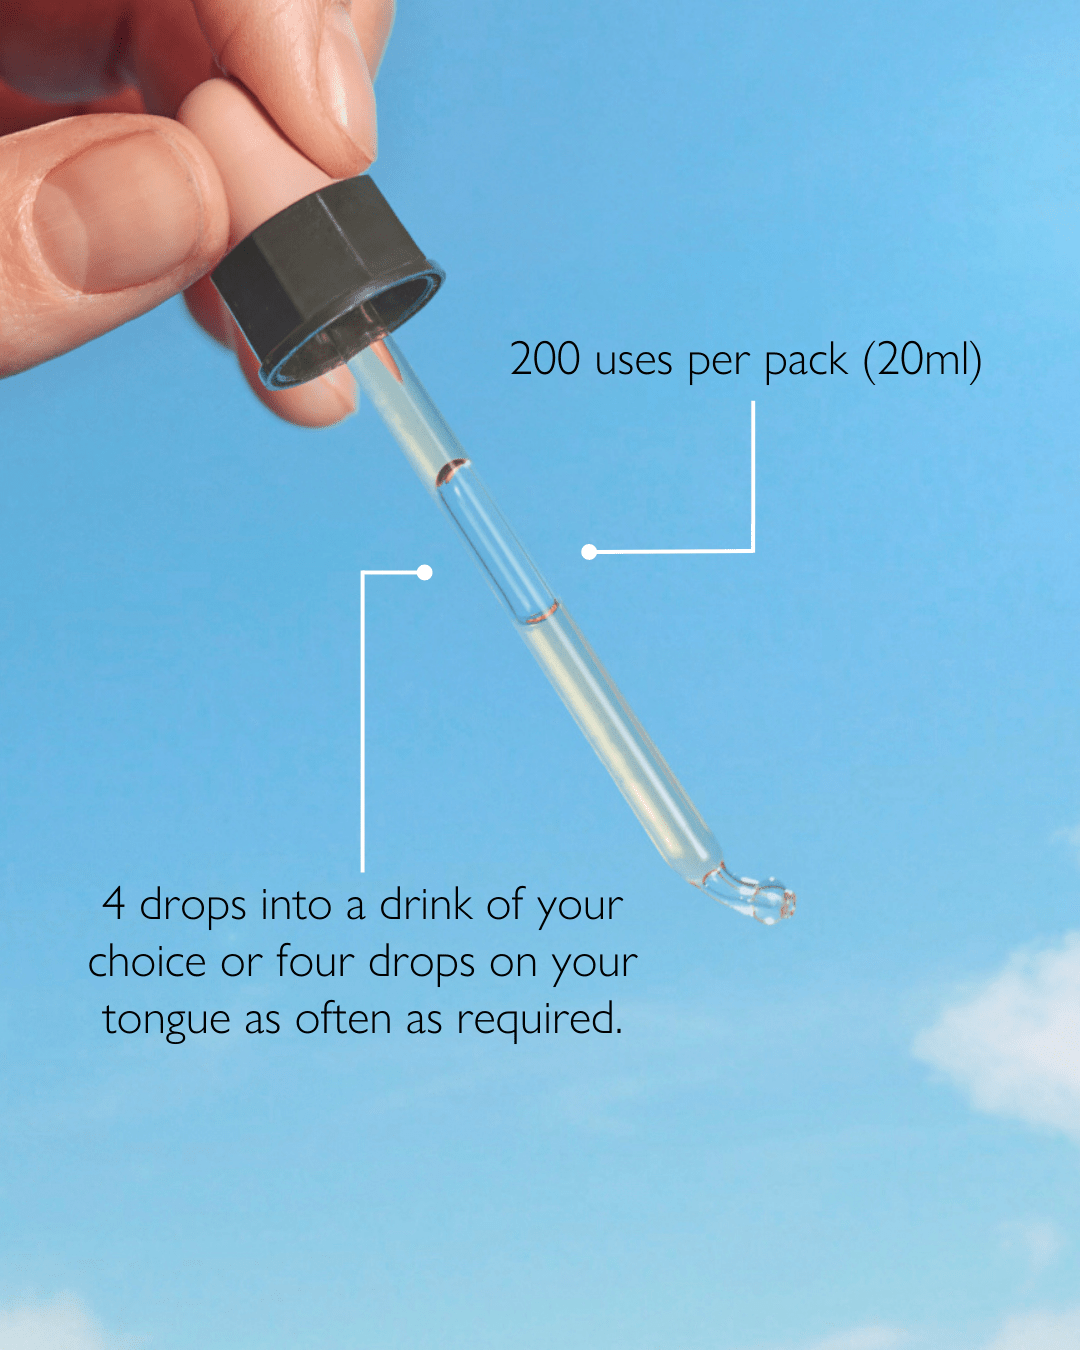 Infographic which contains two fingers holding the Rescue Plus Dropper and says"200 uses per pack , 4 drops into a drink of your choice of four drops on your tongue as often as required".